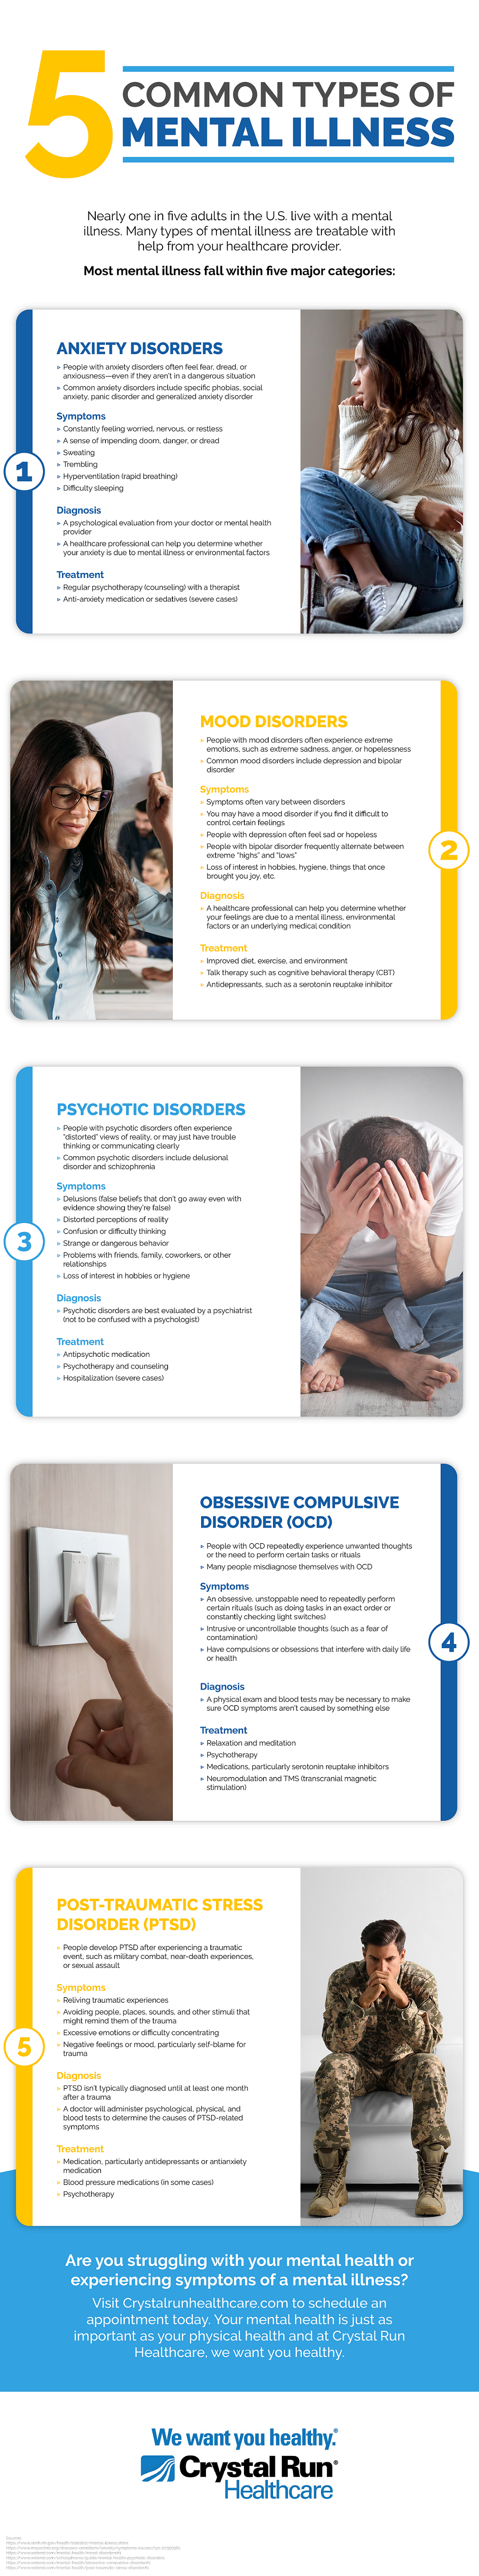 5 Common Types of Mental Illness Infographic